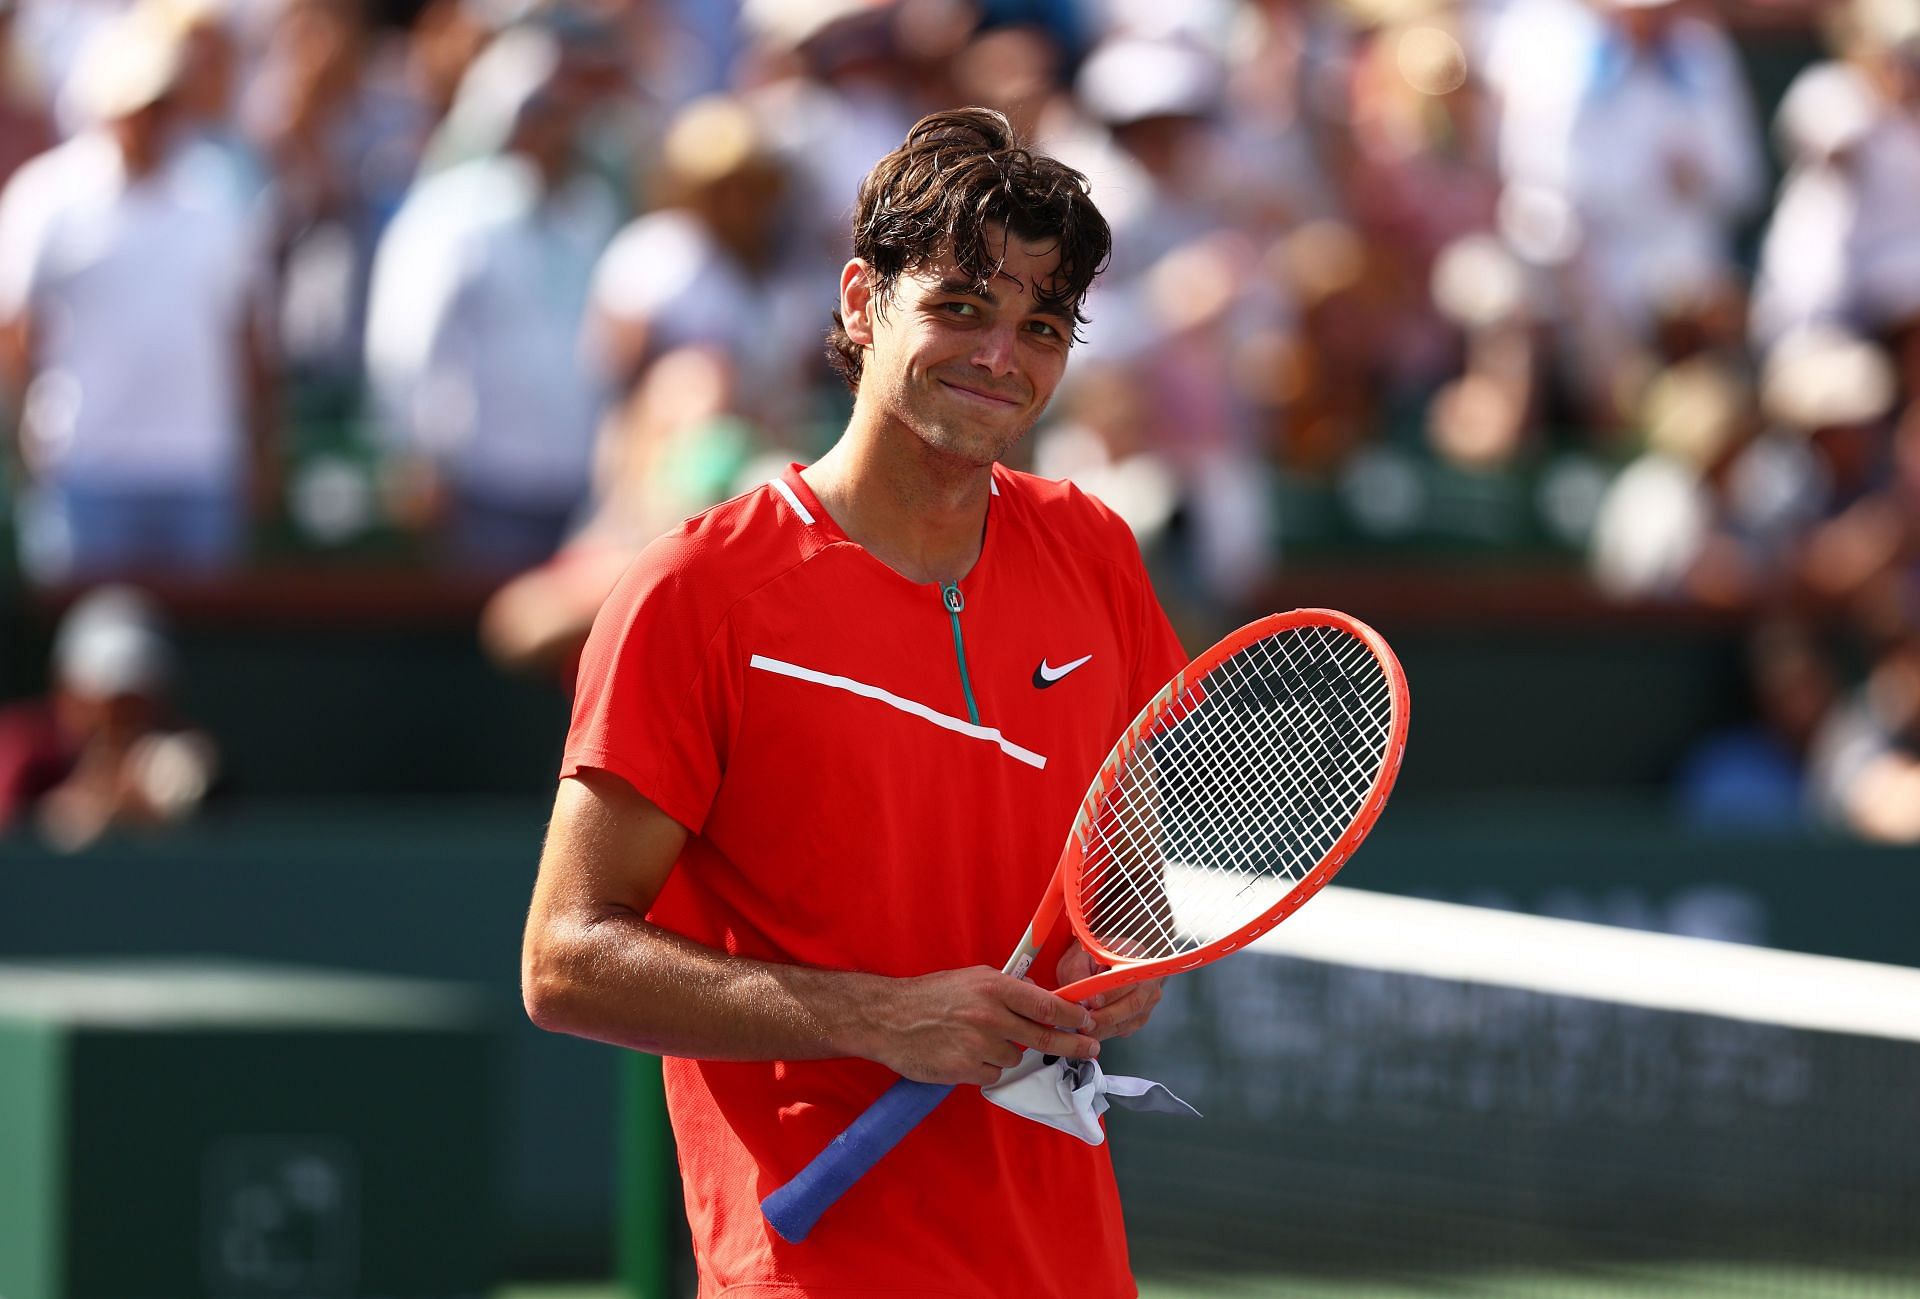 Taylor Fritz wanted to shoot for the top five once he reached the top 10 in the ATP rankings